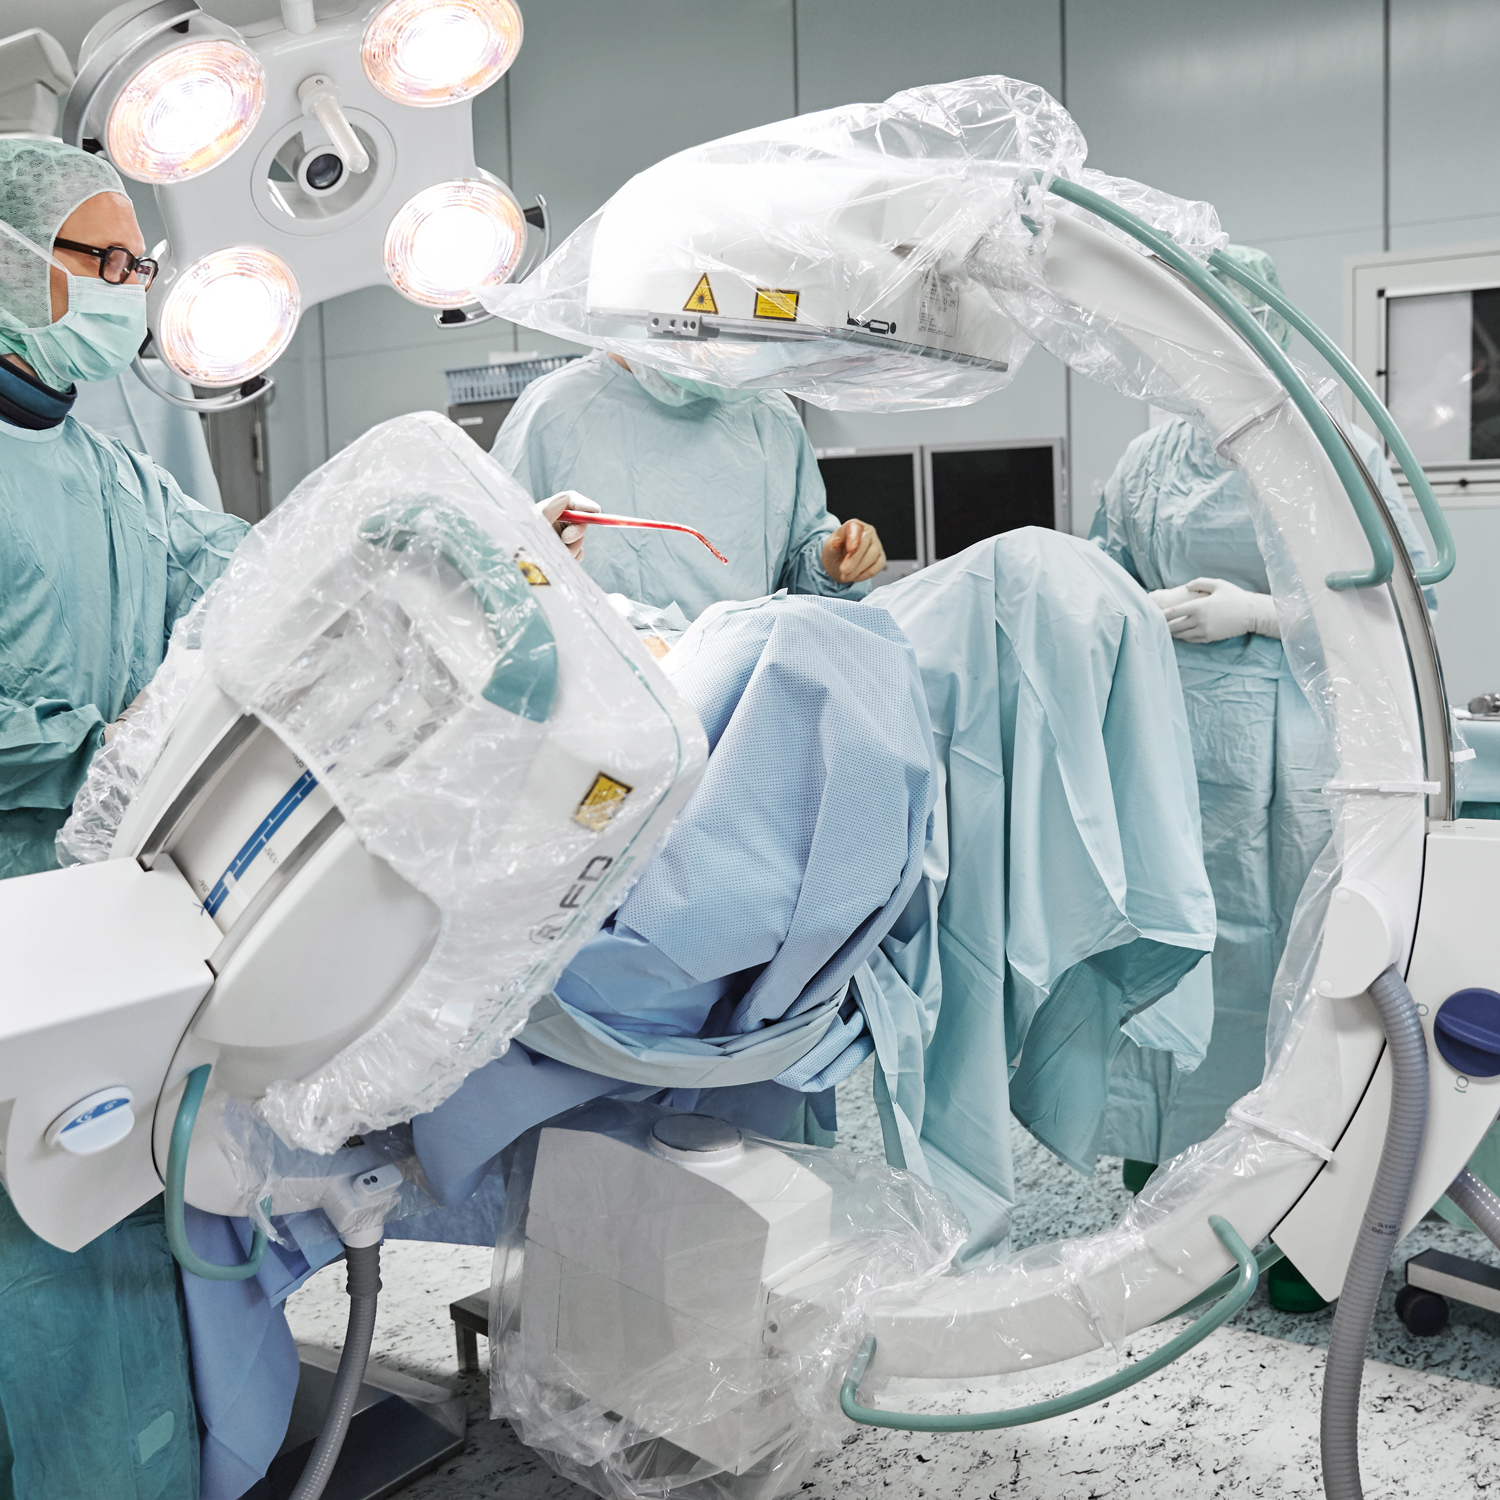 Two Ziehm Flat panel C-arms imaging patient in operating theatre.